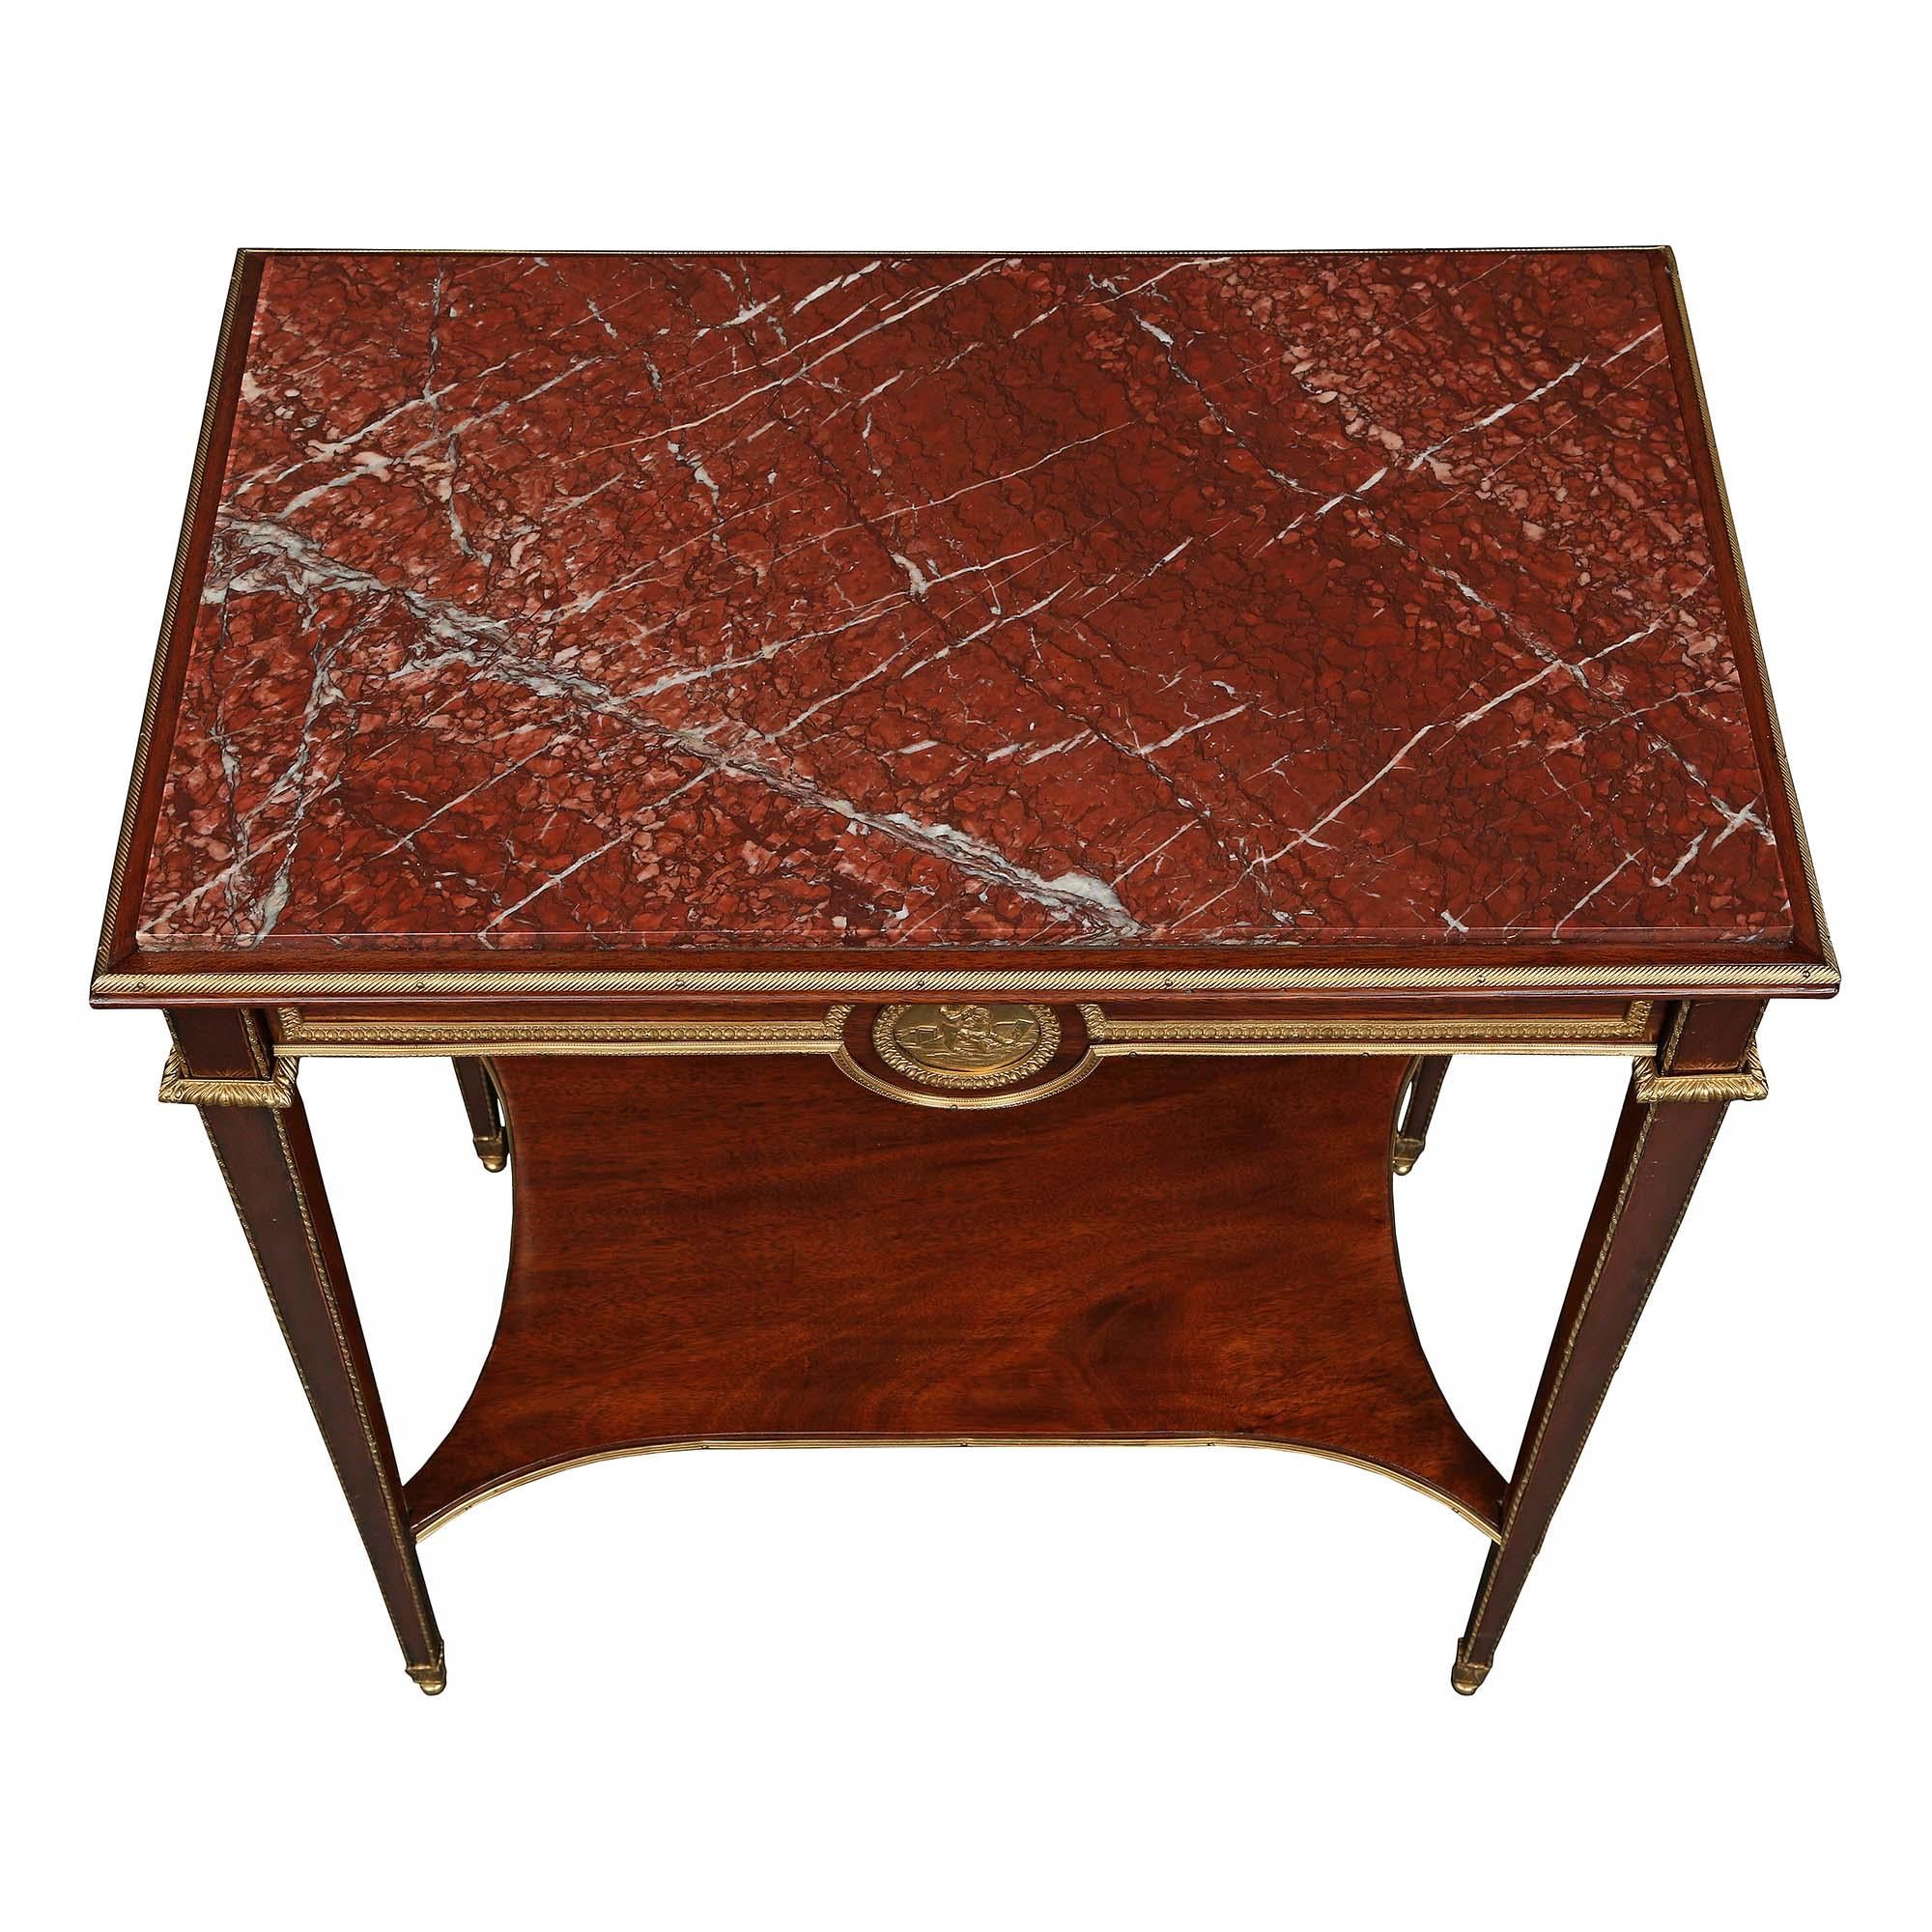 French Mid-19th Century Louis XVI Style Mahogany Rectangular Side Table For Sale 1